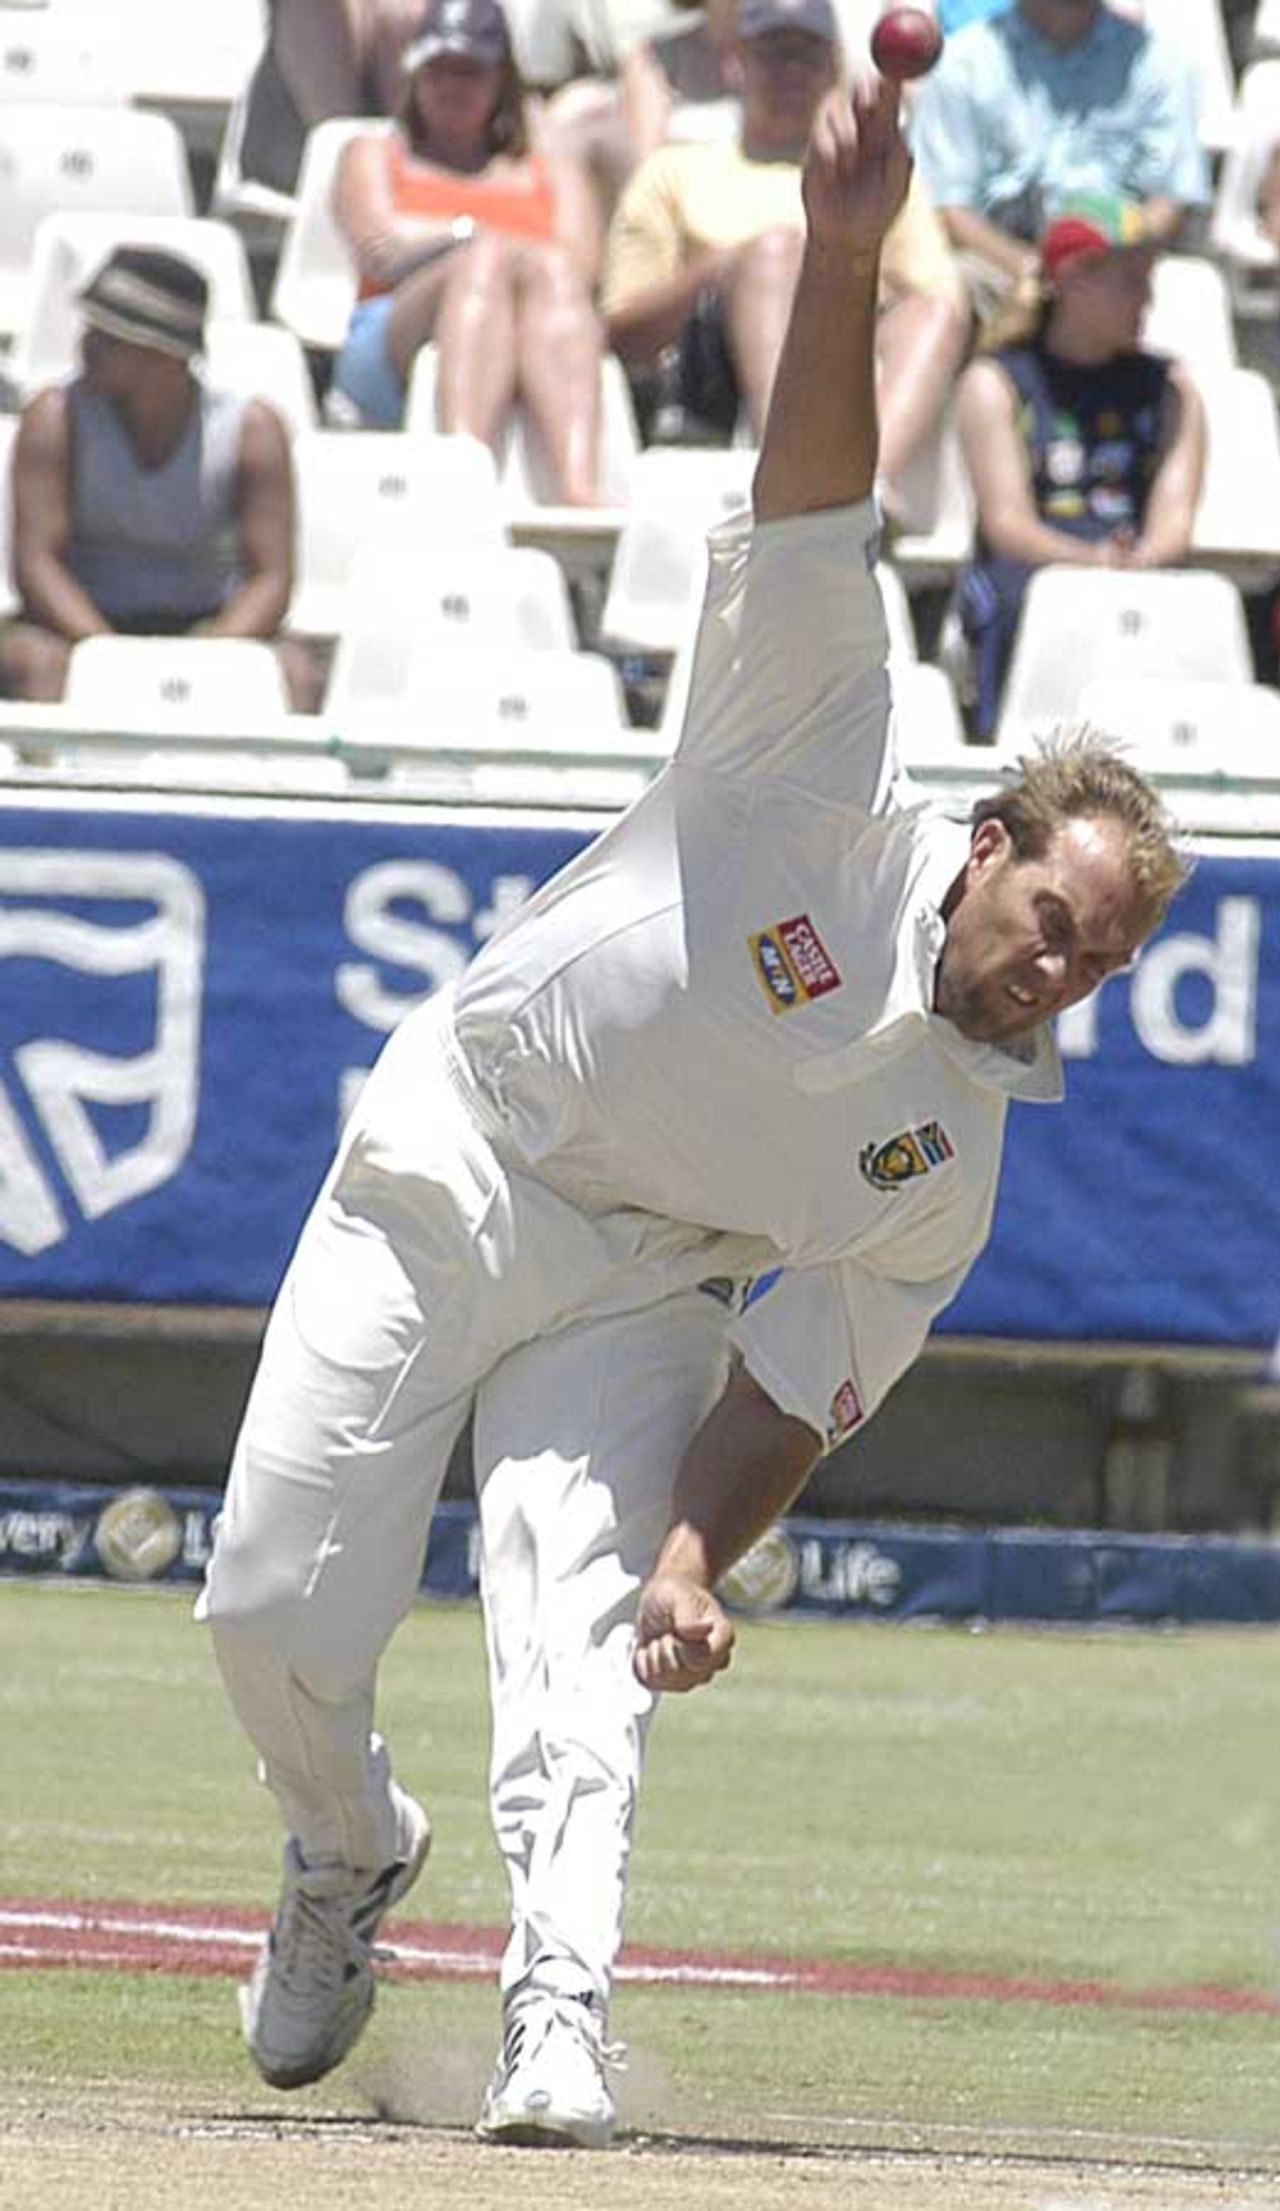 Jacques Kallis in full delivery stride against Pakistan at Newlands